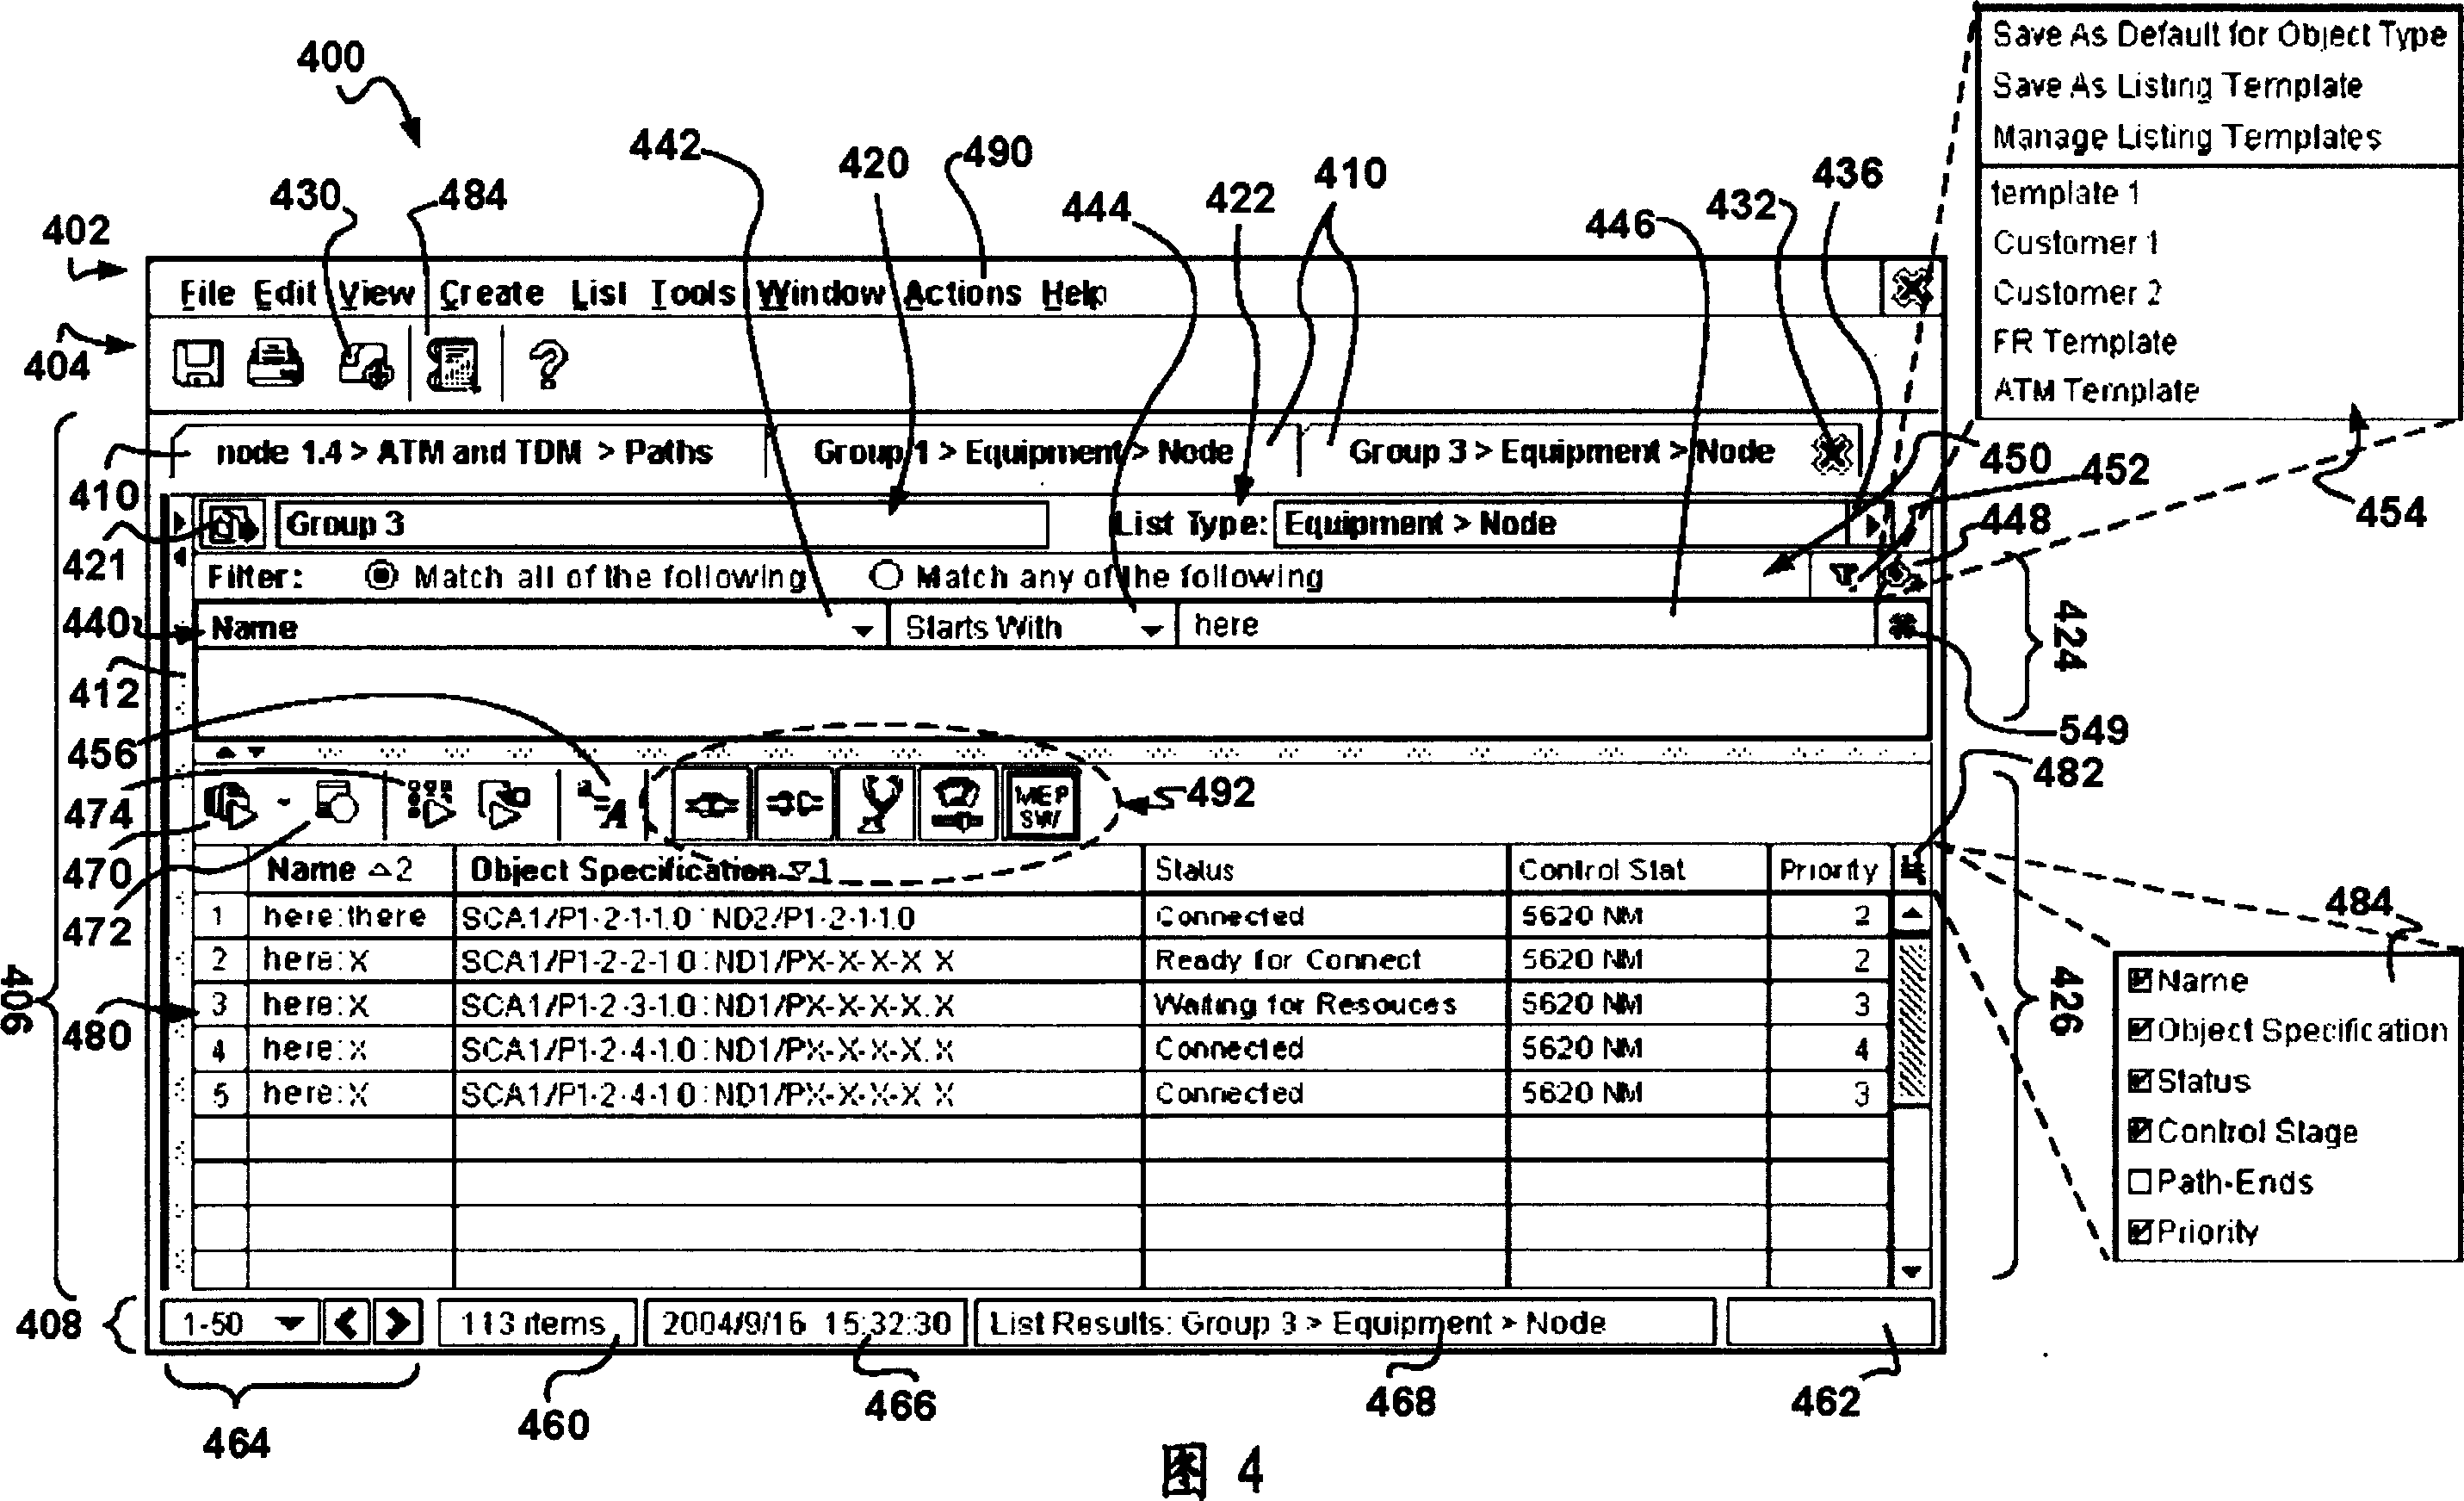 Graphical user interface for generic listing of managed objects